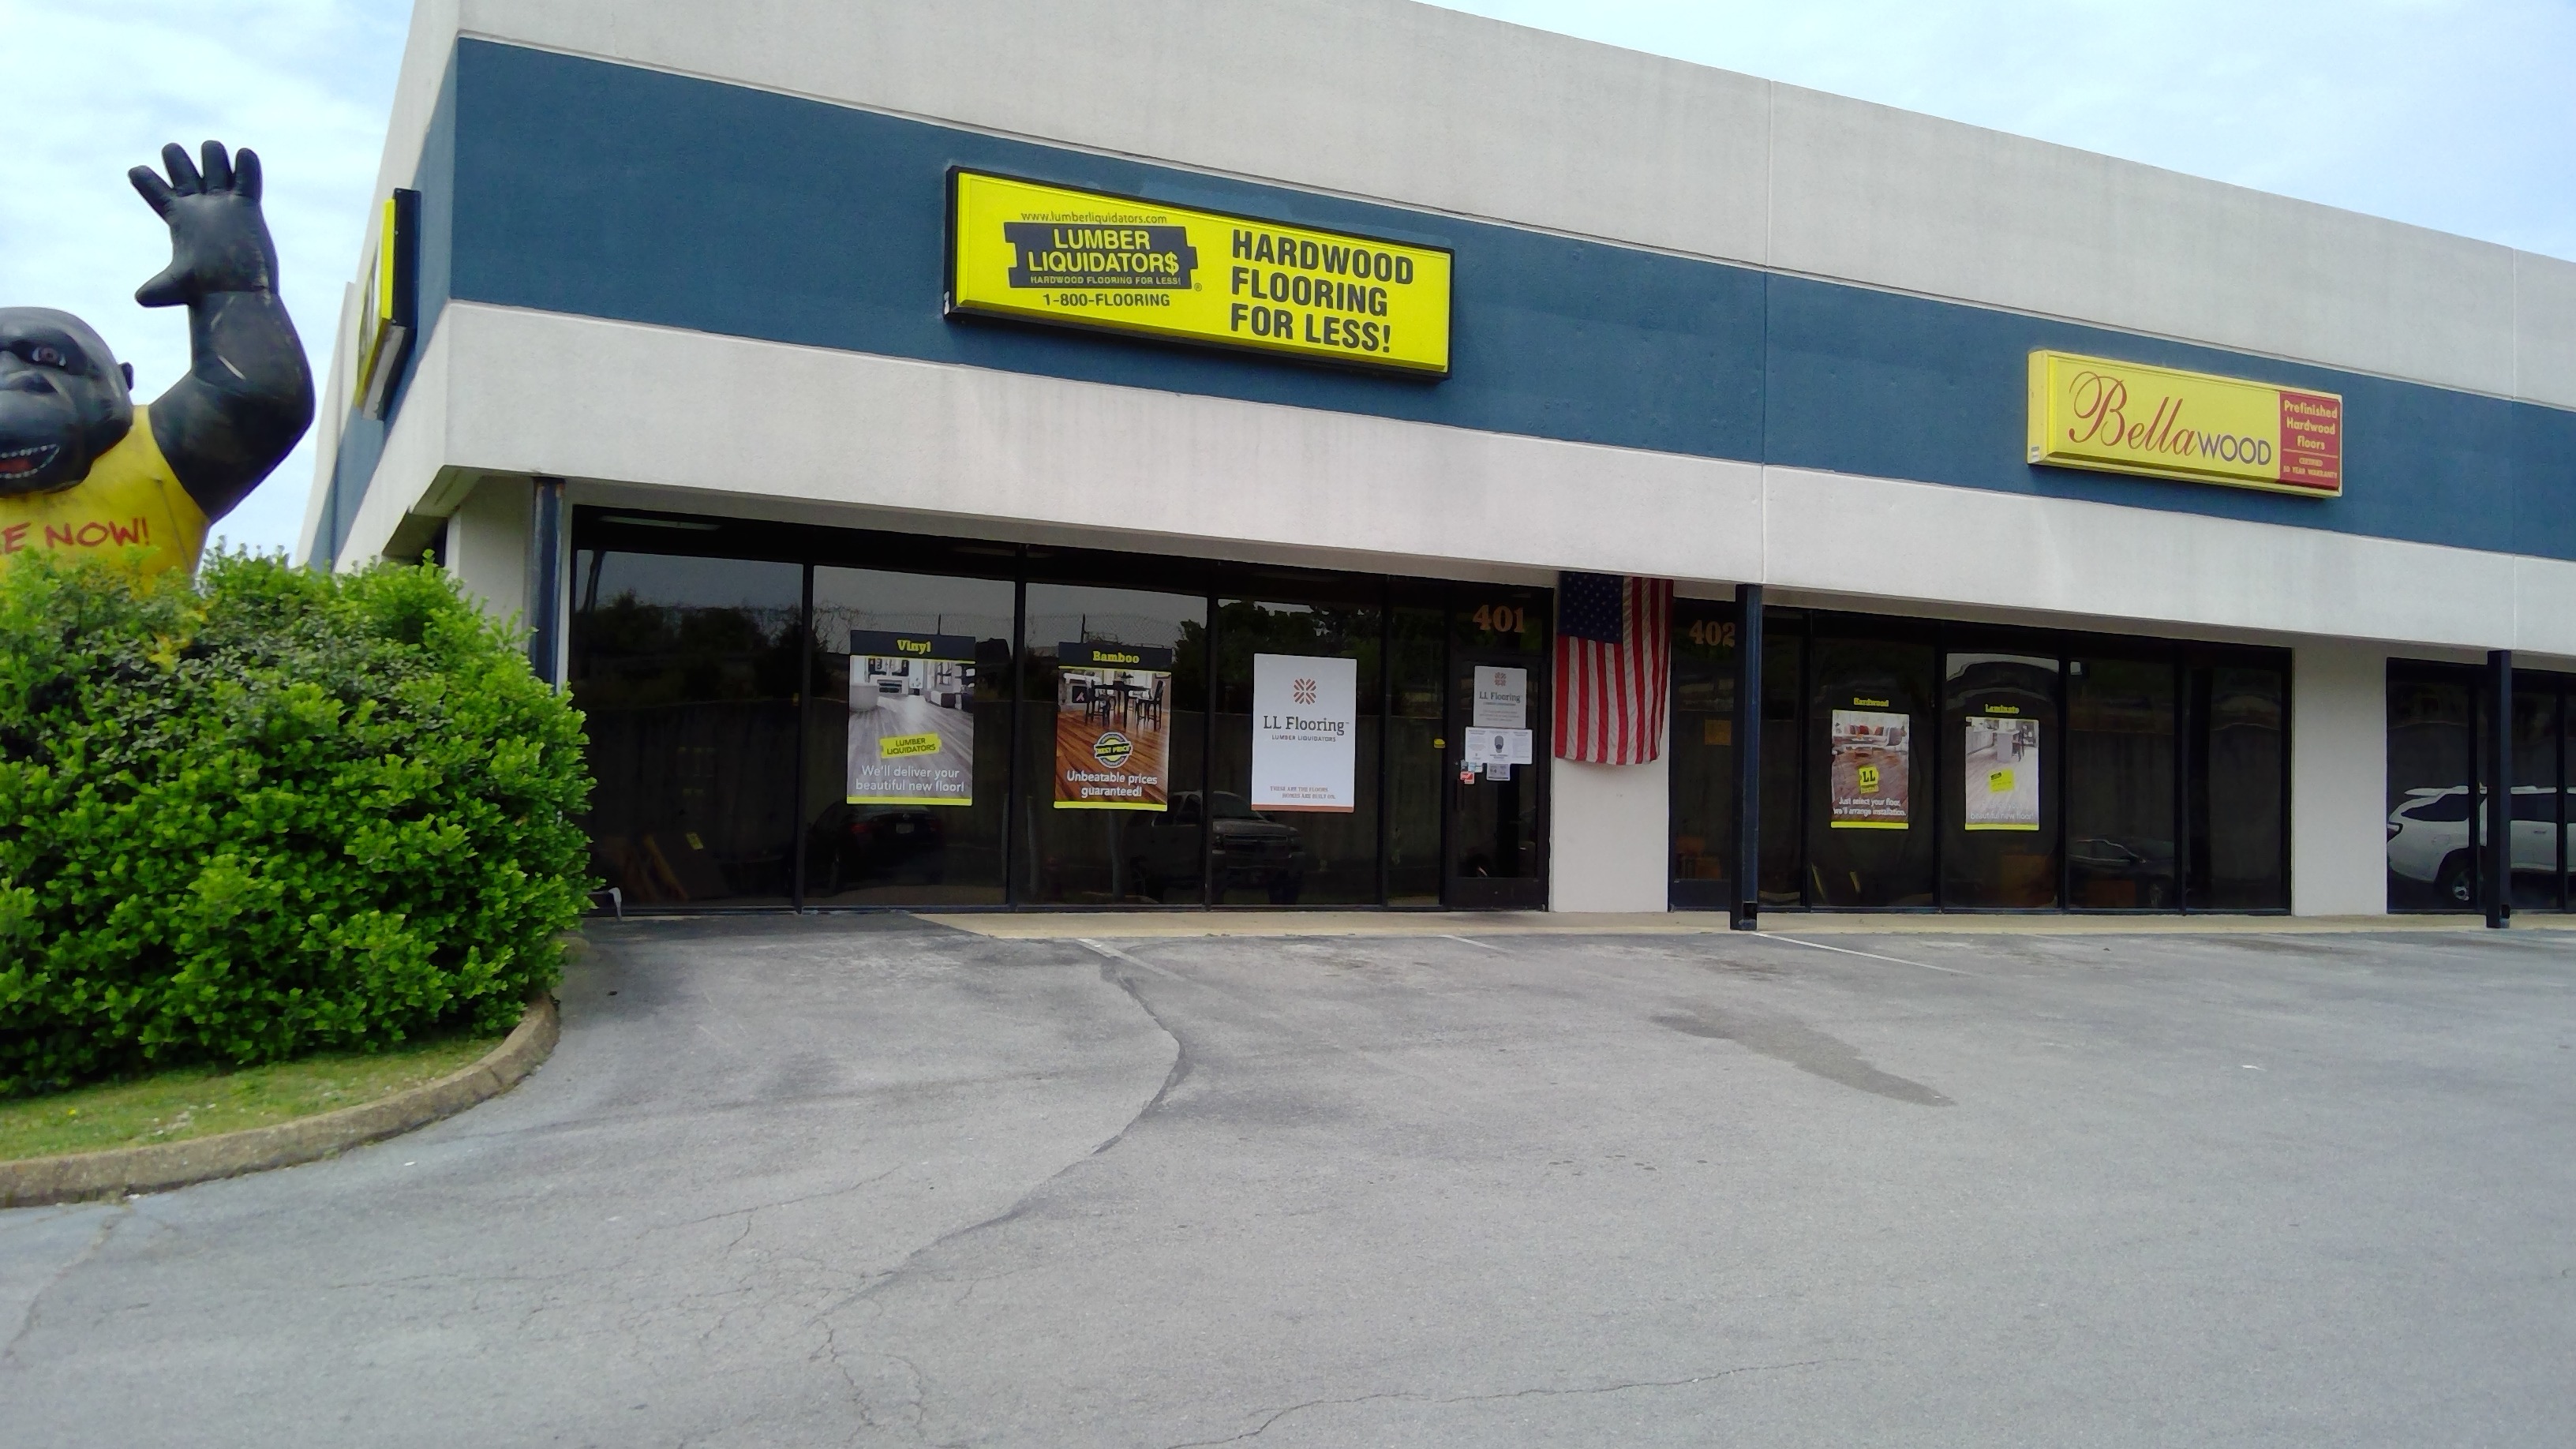 LL Flooring #1138 Chattanooga | 4295 Cromwell Road | Storefront